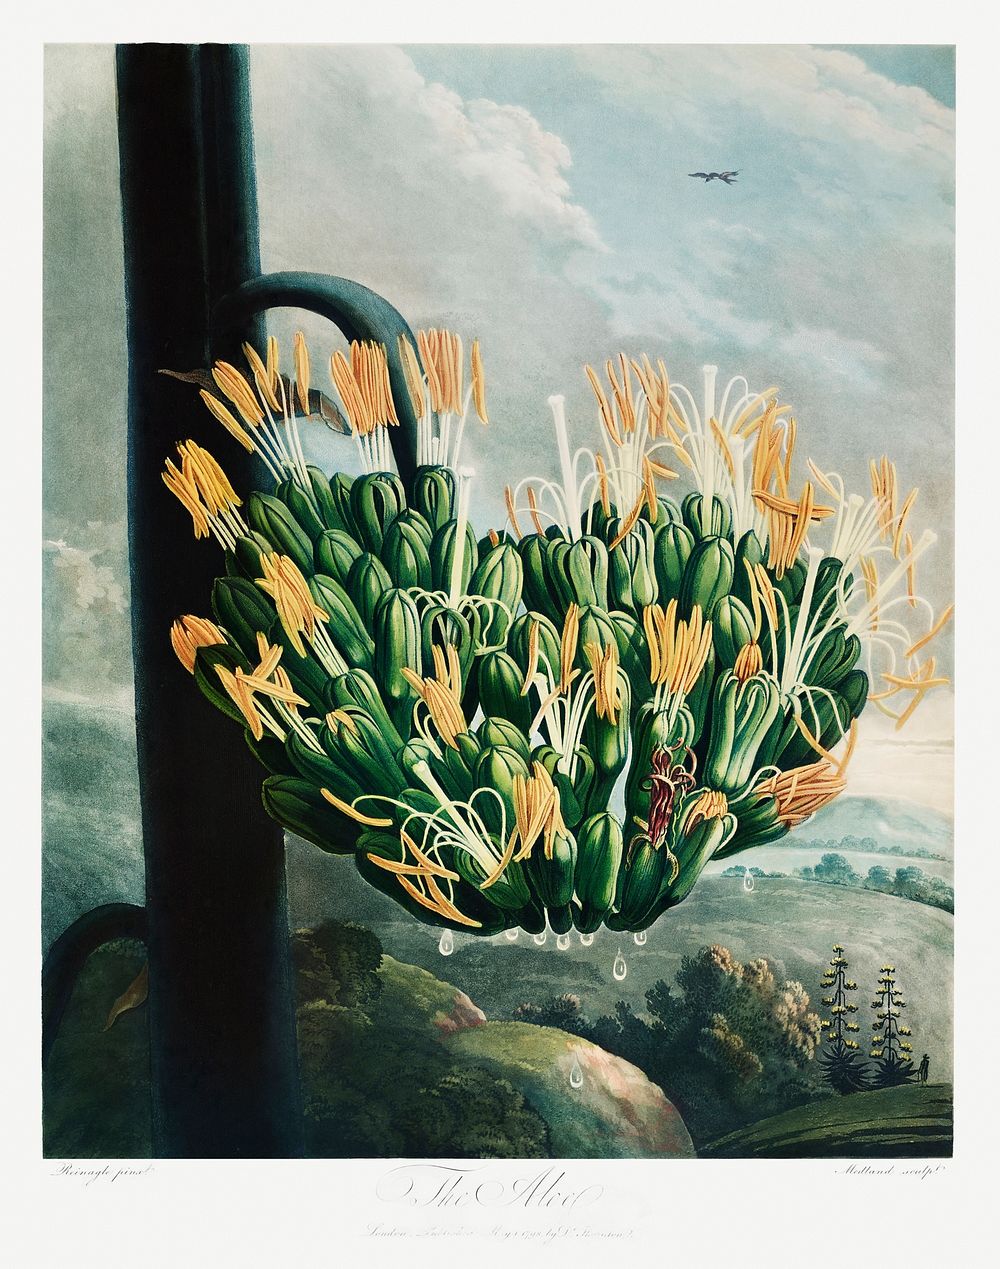 The Aloe from The Temple of Flora (1807) by Robert John Thornton. Original from Biodiversity Heritage Library. Digitally…